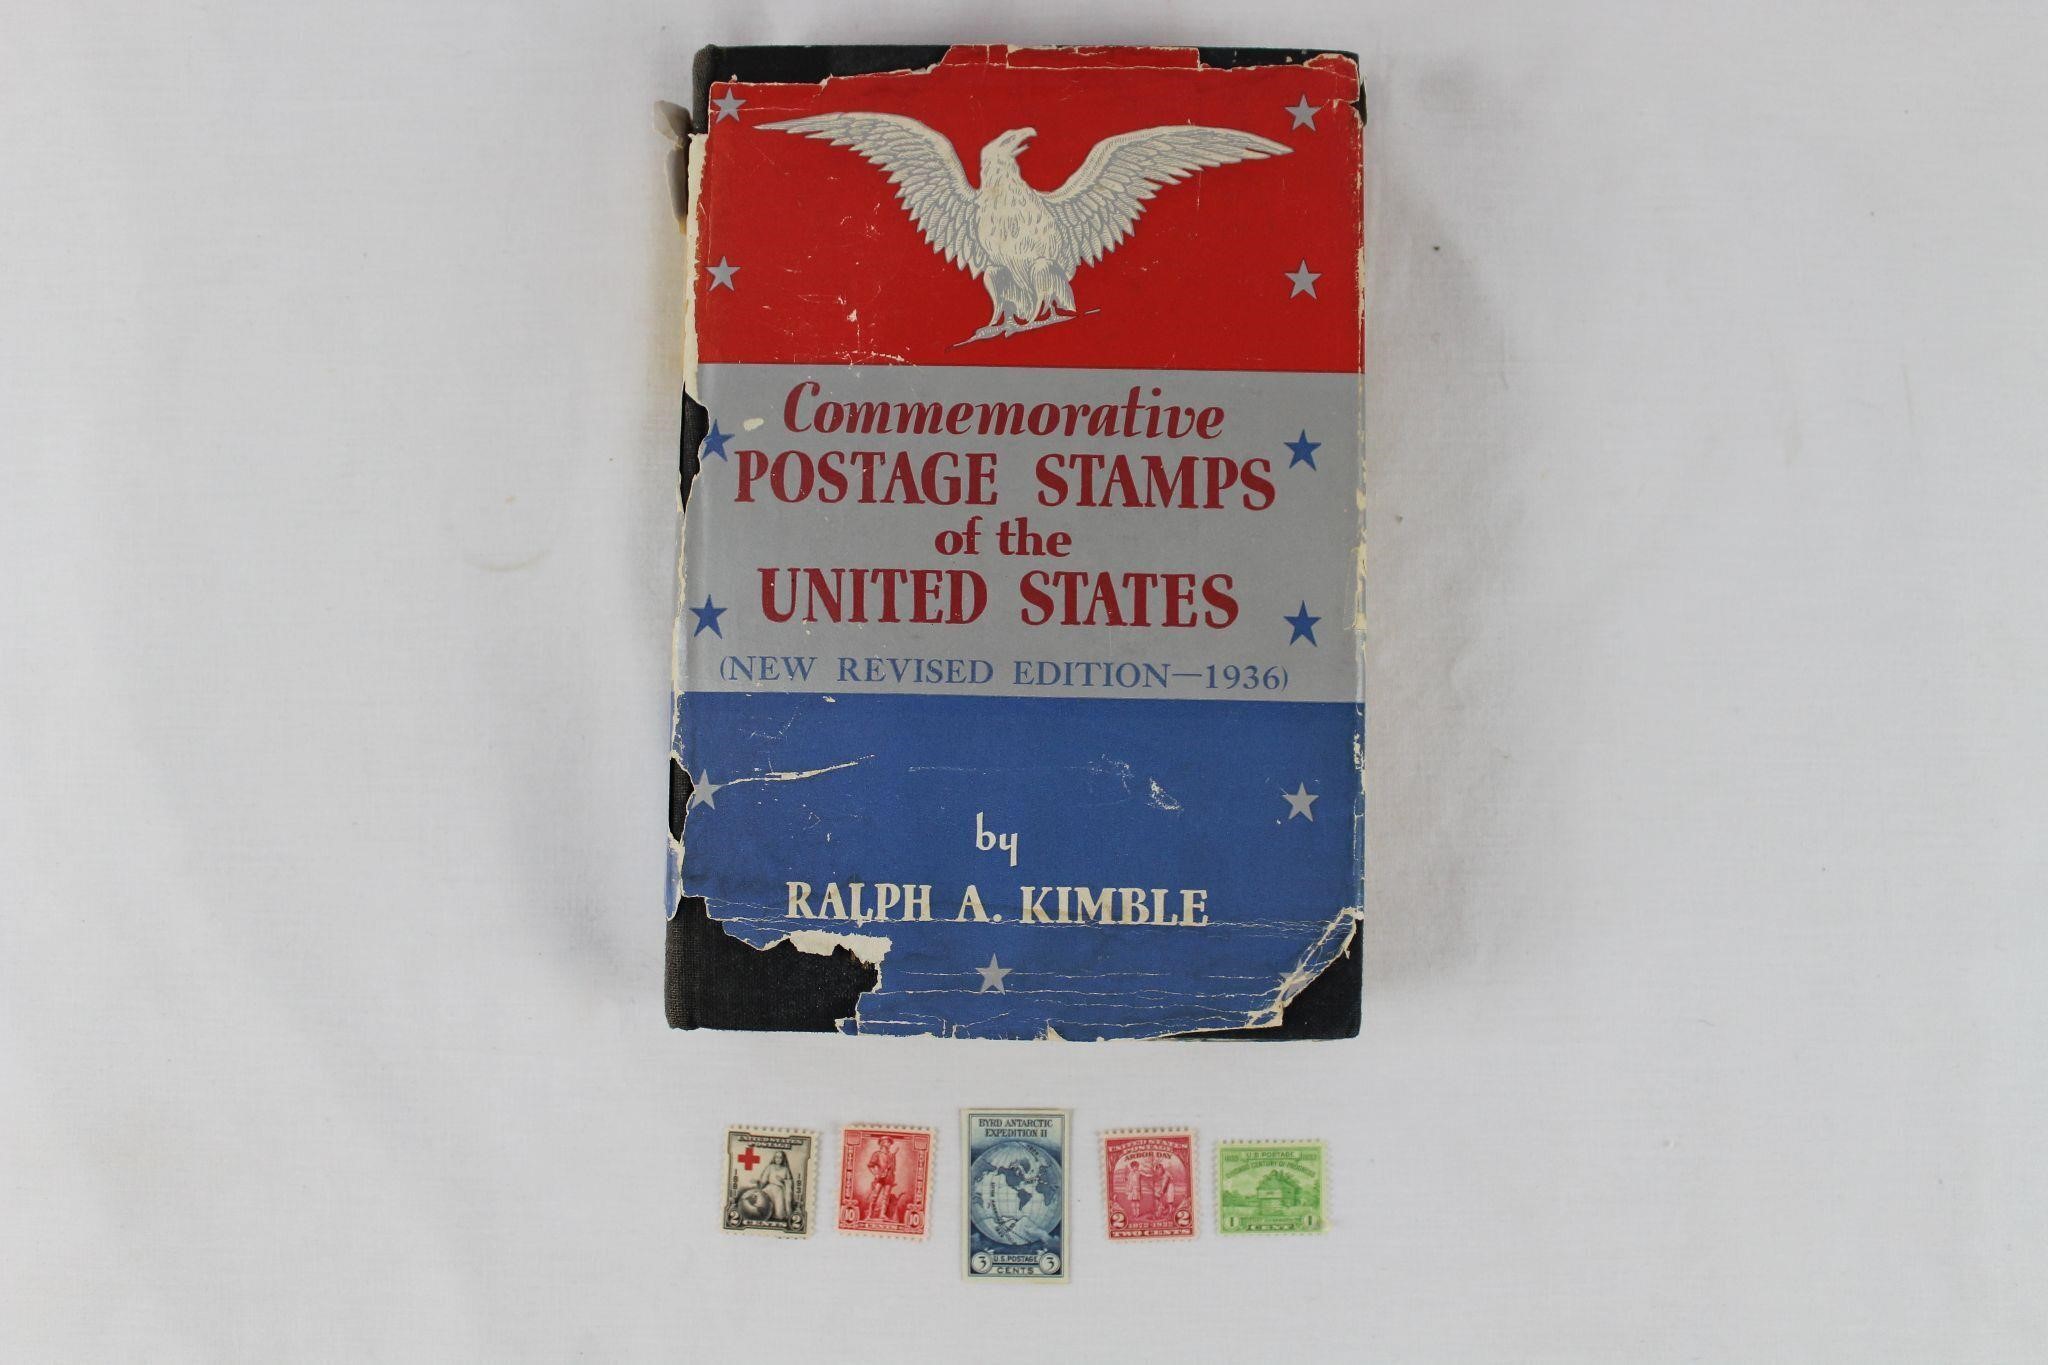 1936 Commemorative Postage Stamps of United States